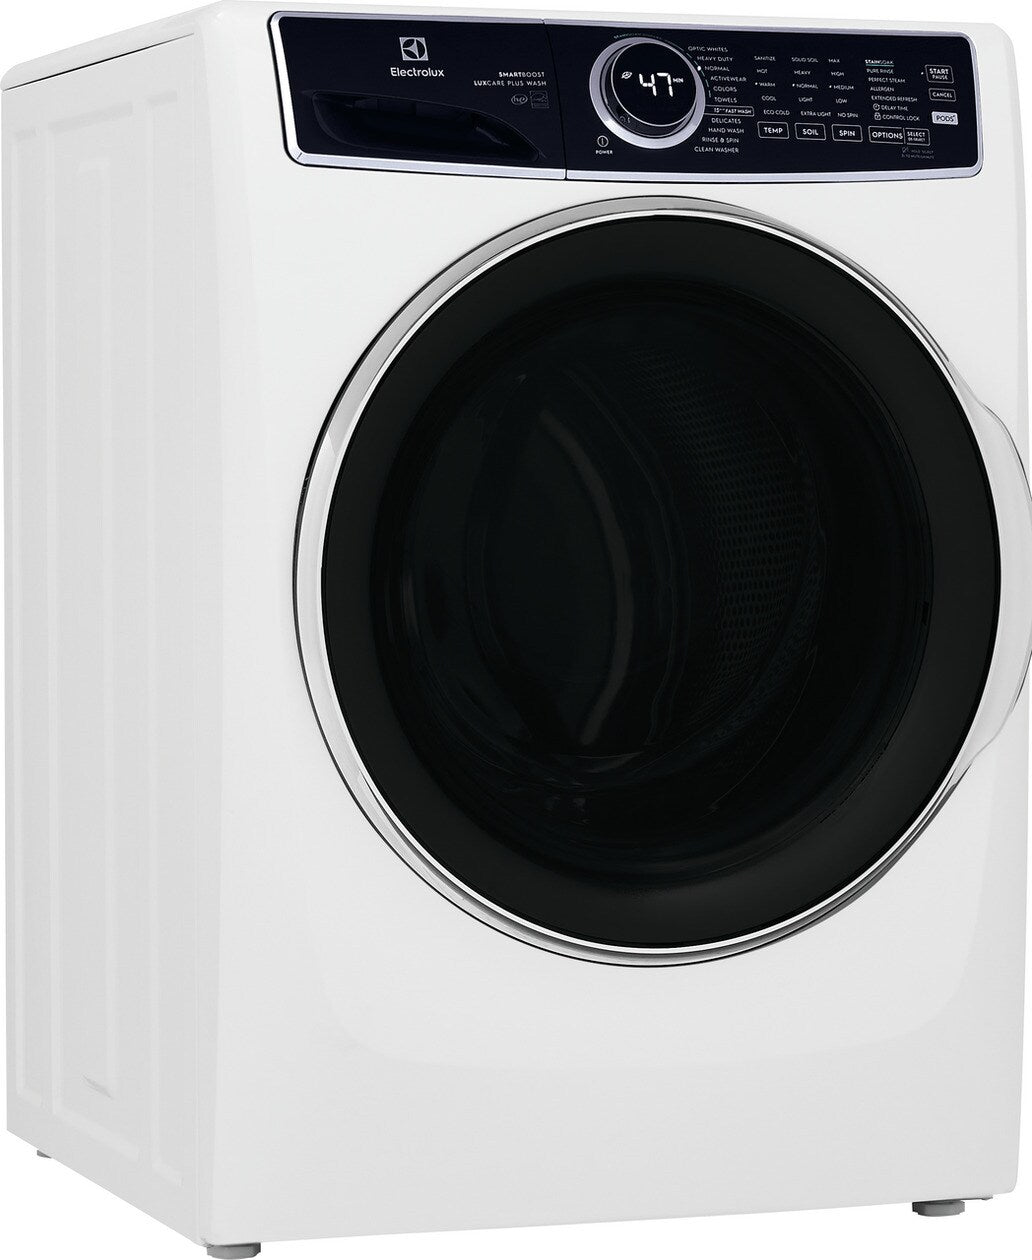 Electrolux - 4.5 cu. Ft  Front Load Washer in White - ELFW7637AW